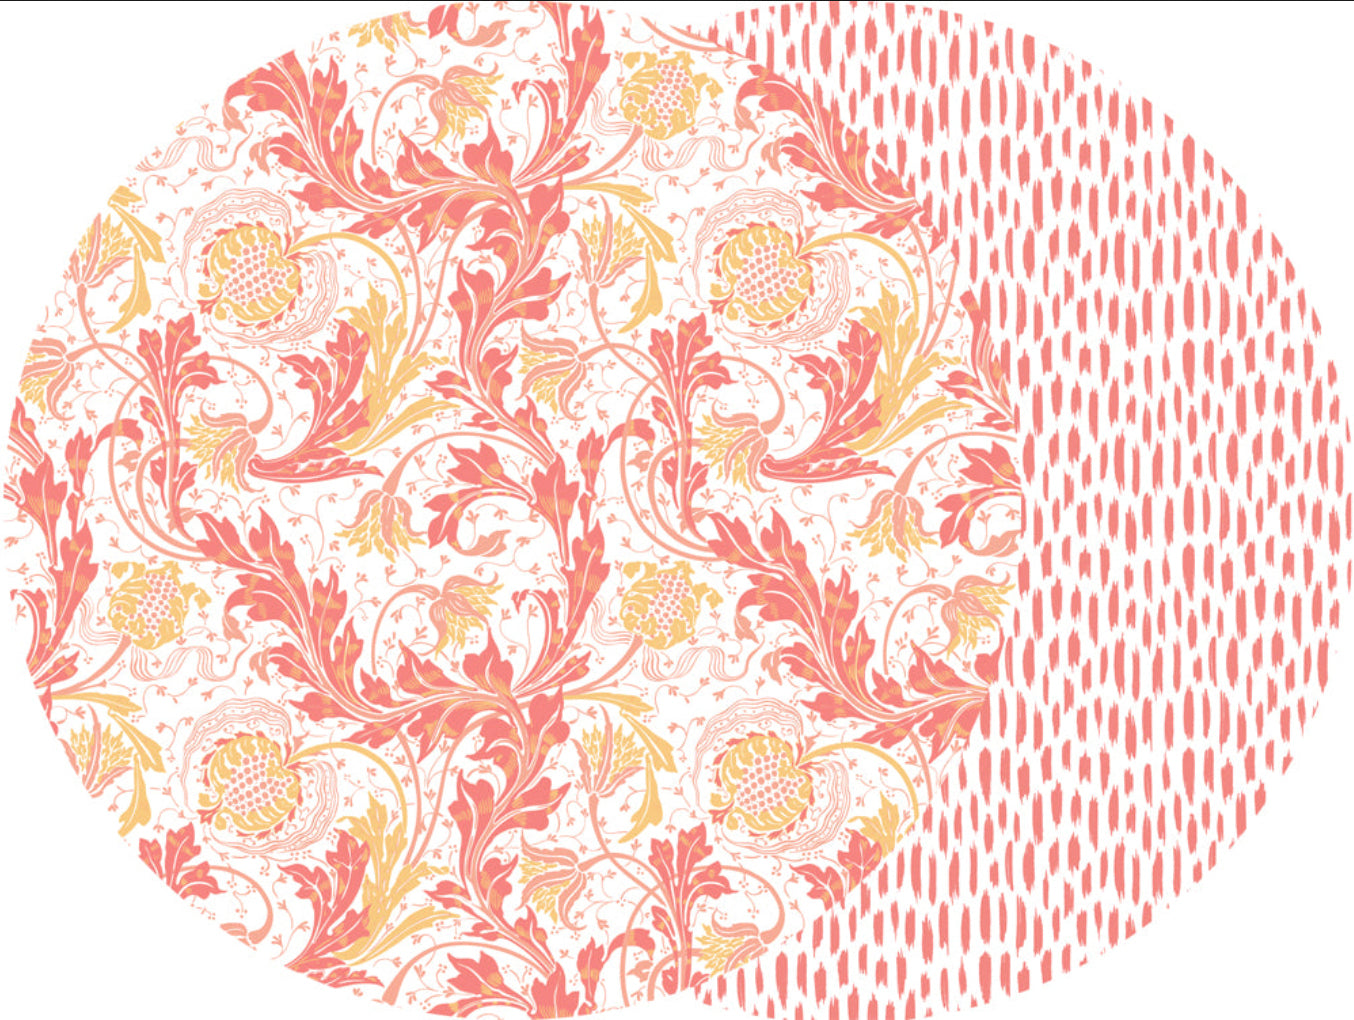 ROUND TWO SIDED POMEGRANATE AND JAIPUR PLACEMAT ~ WATERMELON